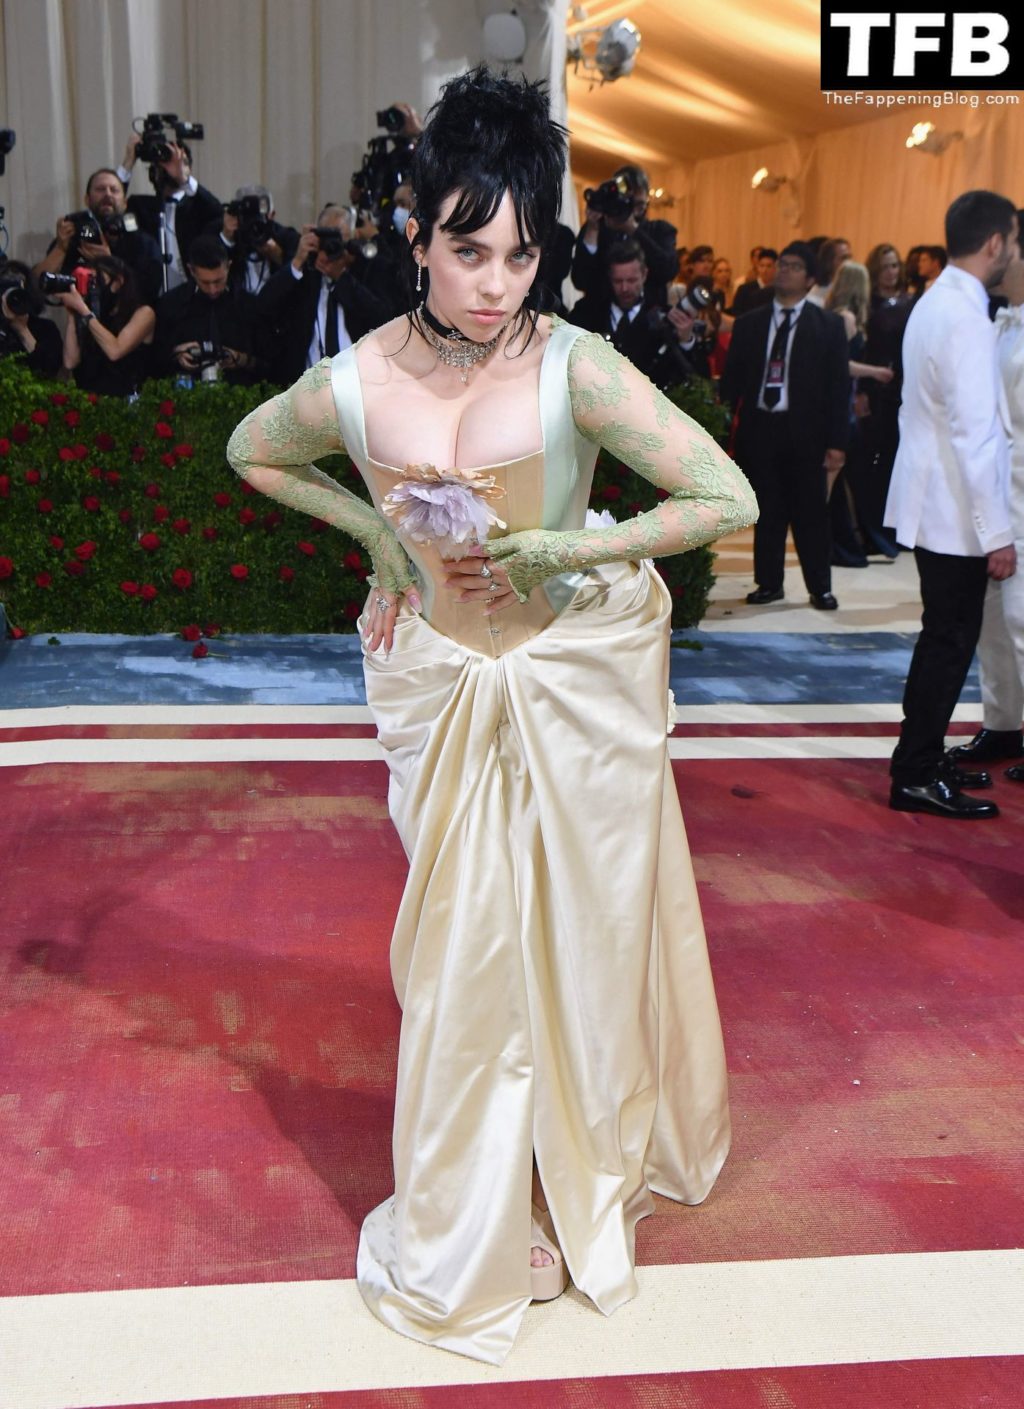 Billie Eilish Sexy The Fappening Blog 82 1024x1409 - Billie Eilish Showcases Nice Cleavage at The 2022 Met Gala in NYC (155 Photos)